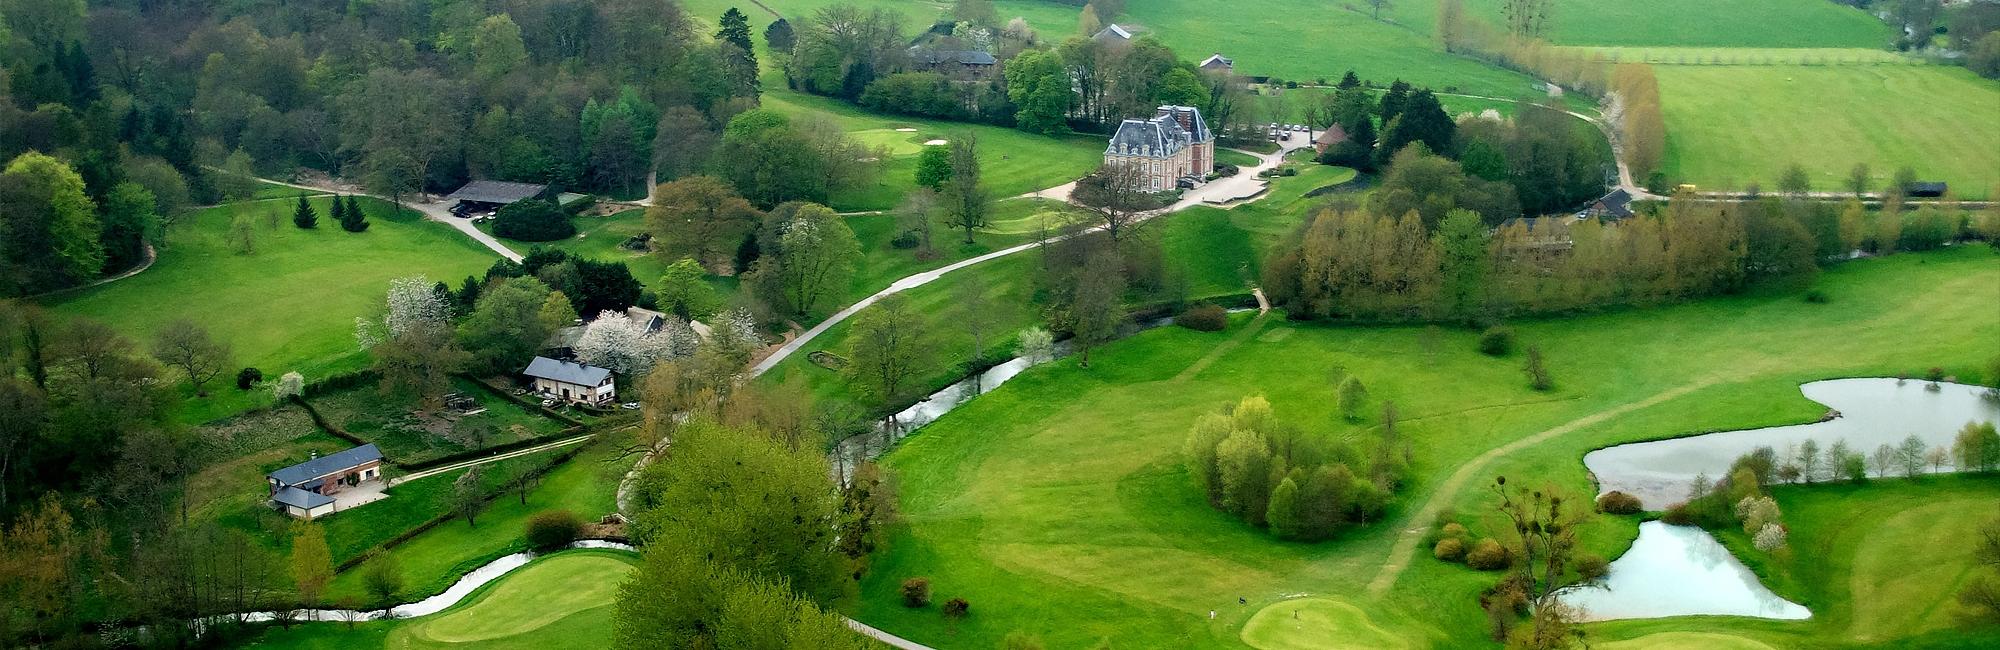 Saint-Saens has lots of the most popular golf course around Normandy